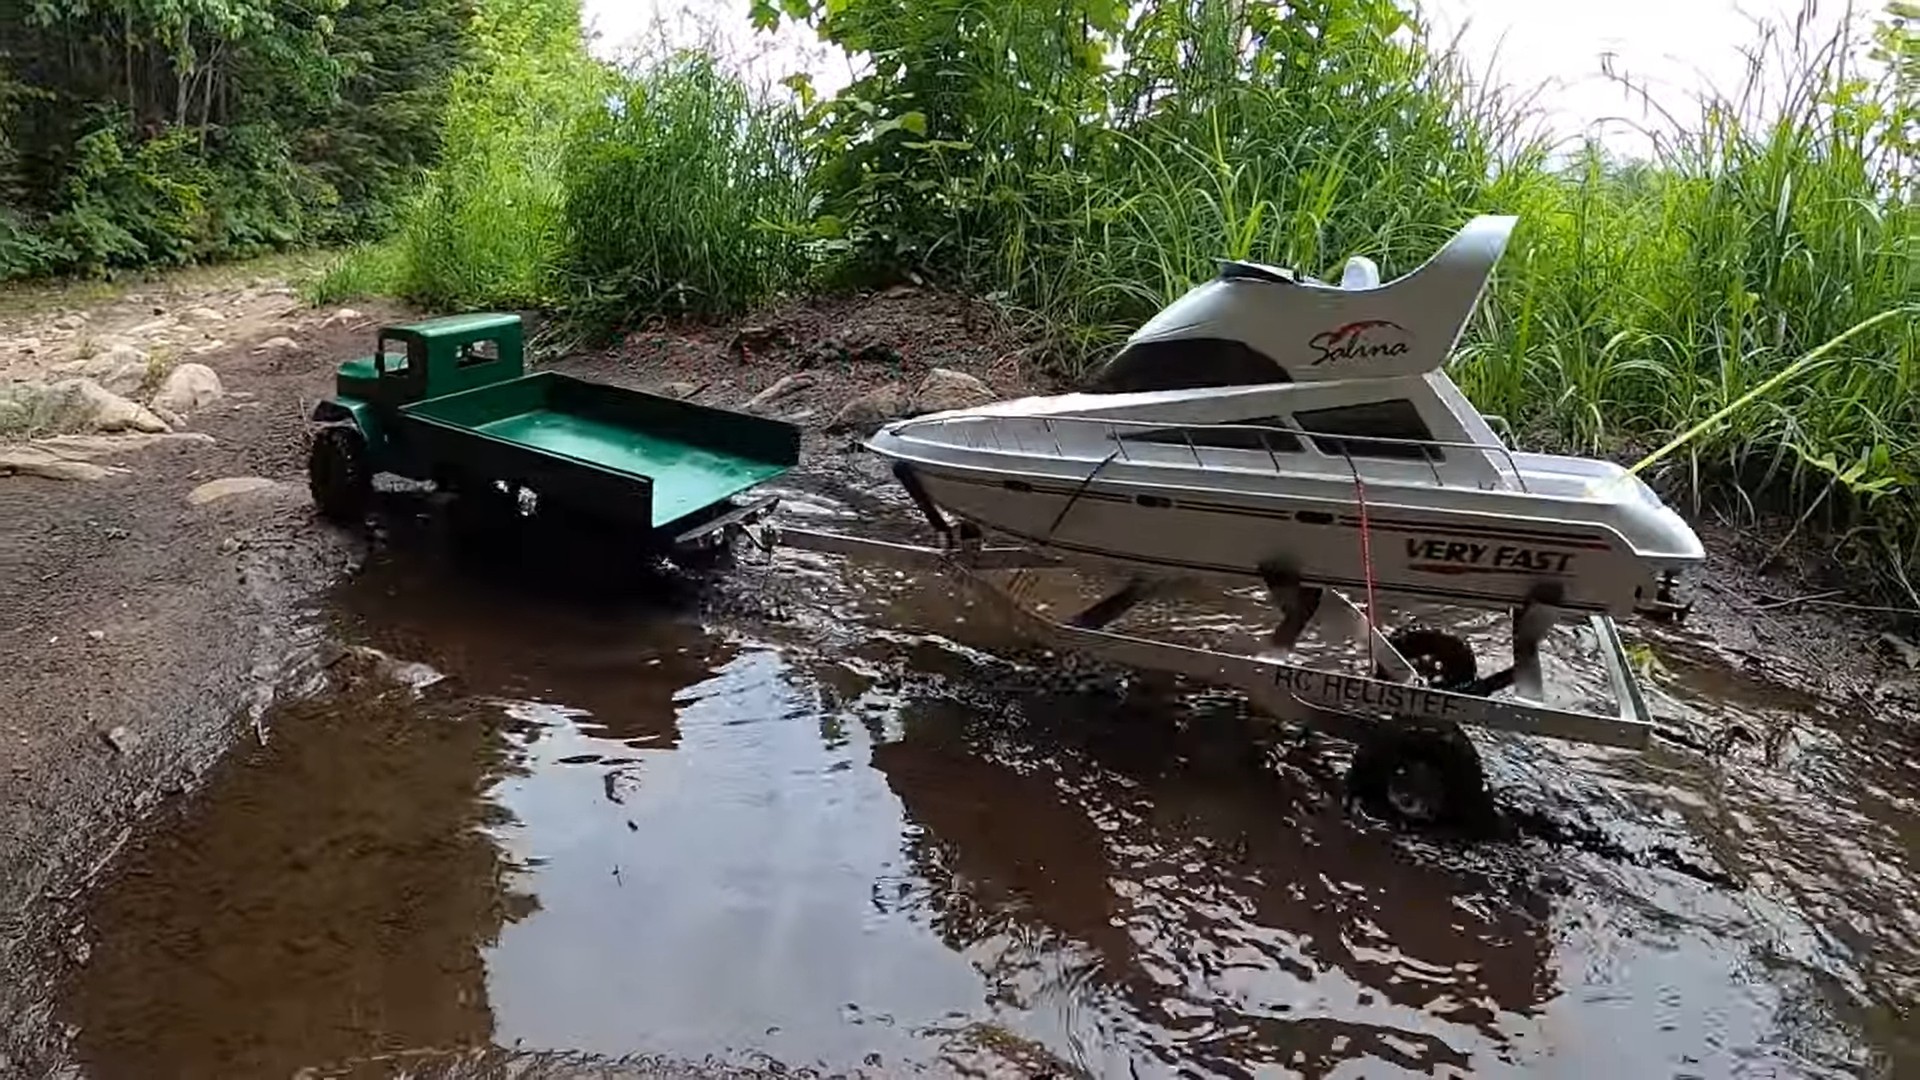 6x6 RC Army Truck Going Off-Road With Fishing Boat Is Summer Leisure Done  Right - autoevolution